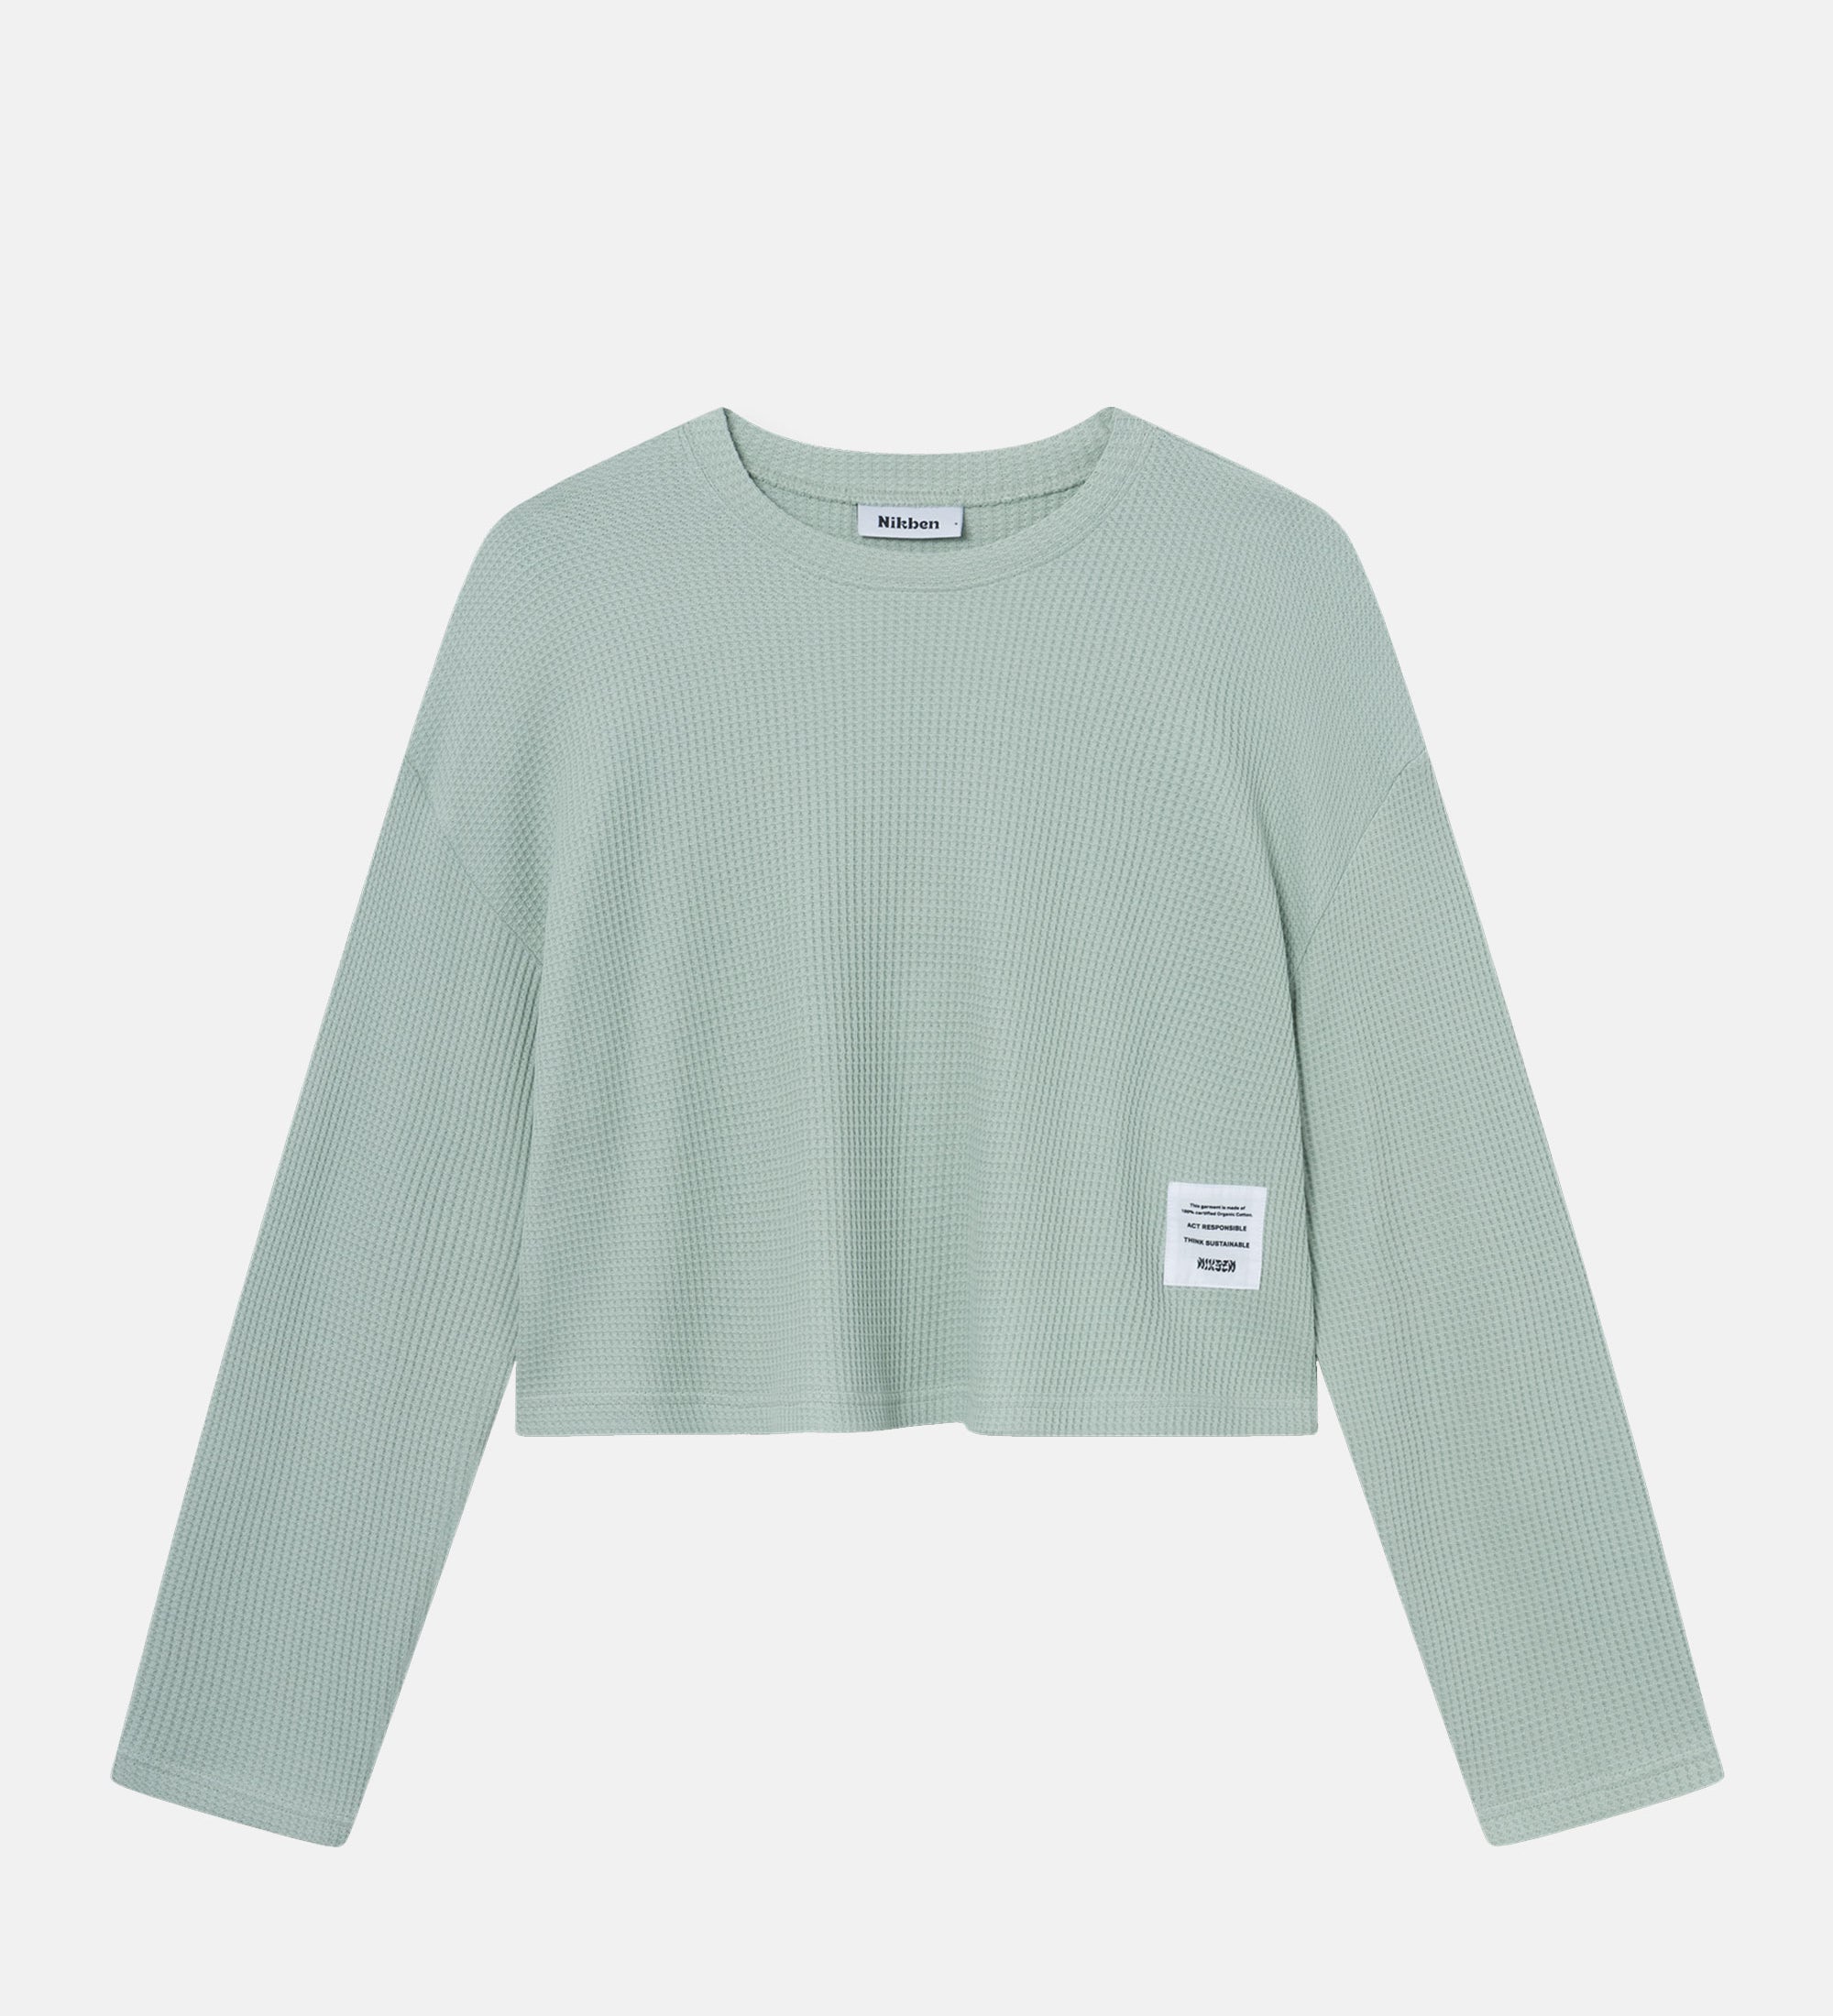 Mint green waffle-patterned cropped sweatshirt with a stitched-on material label.